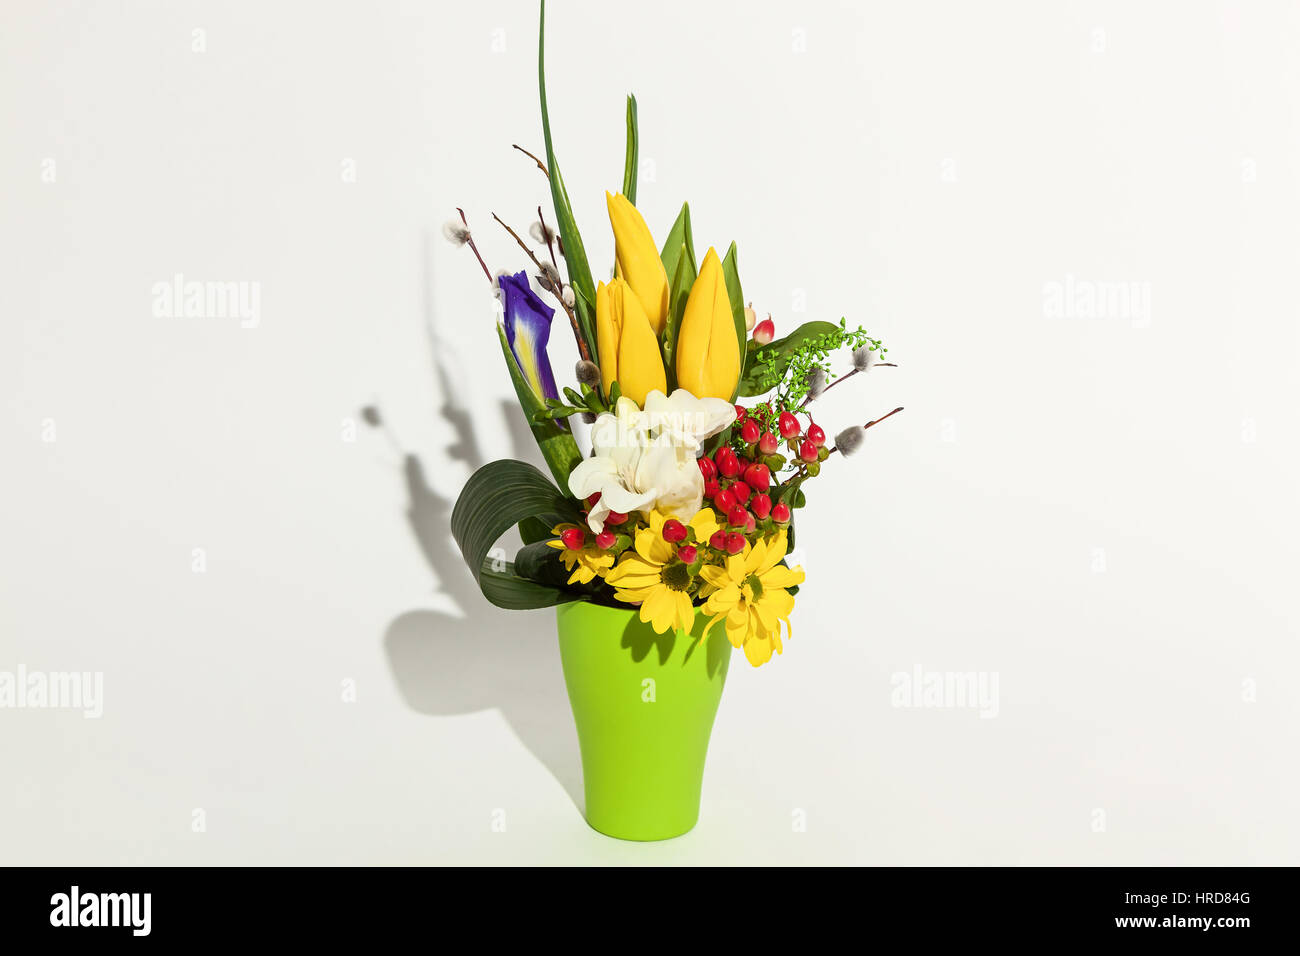 colorful floral bouquet of tulips, chrysanthemums, red hypericums and irises  in vase isolated on white background Stock Photo